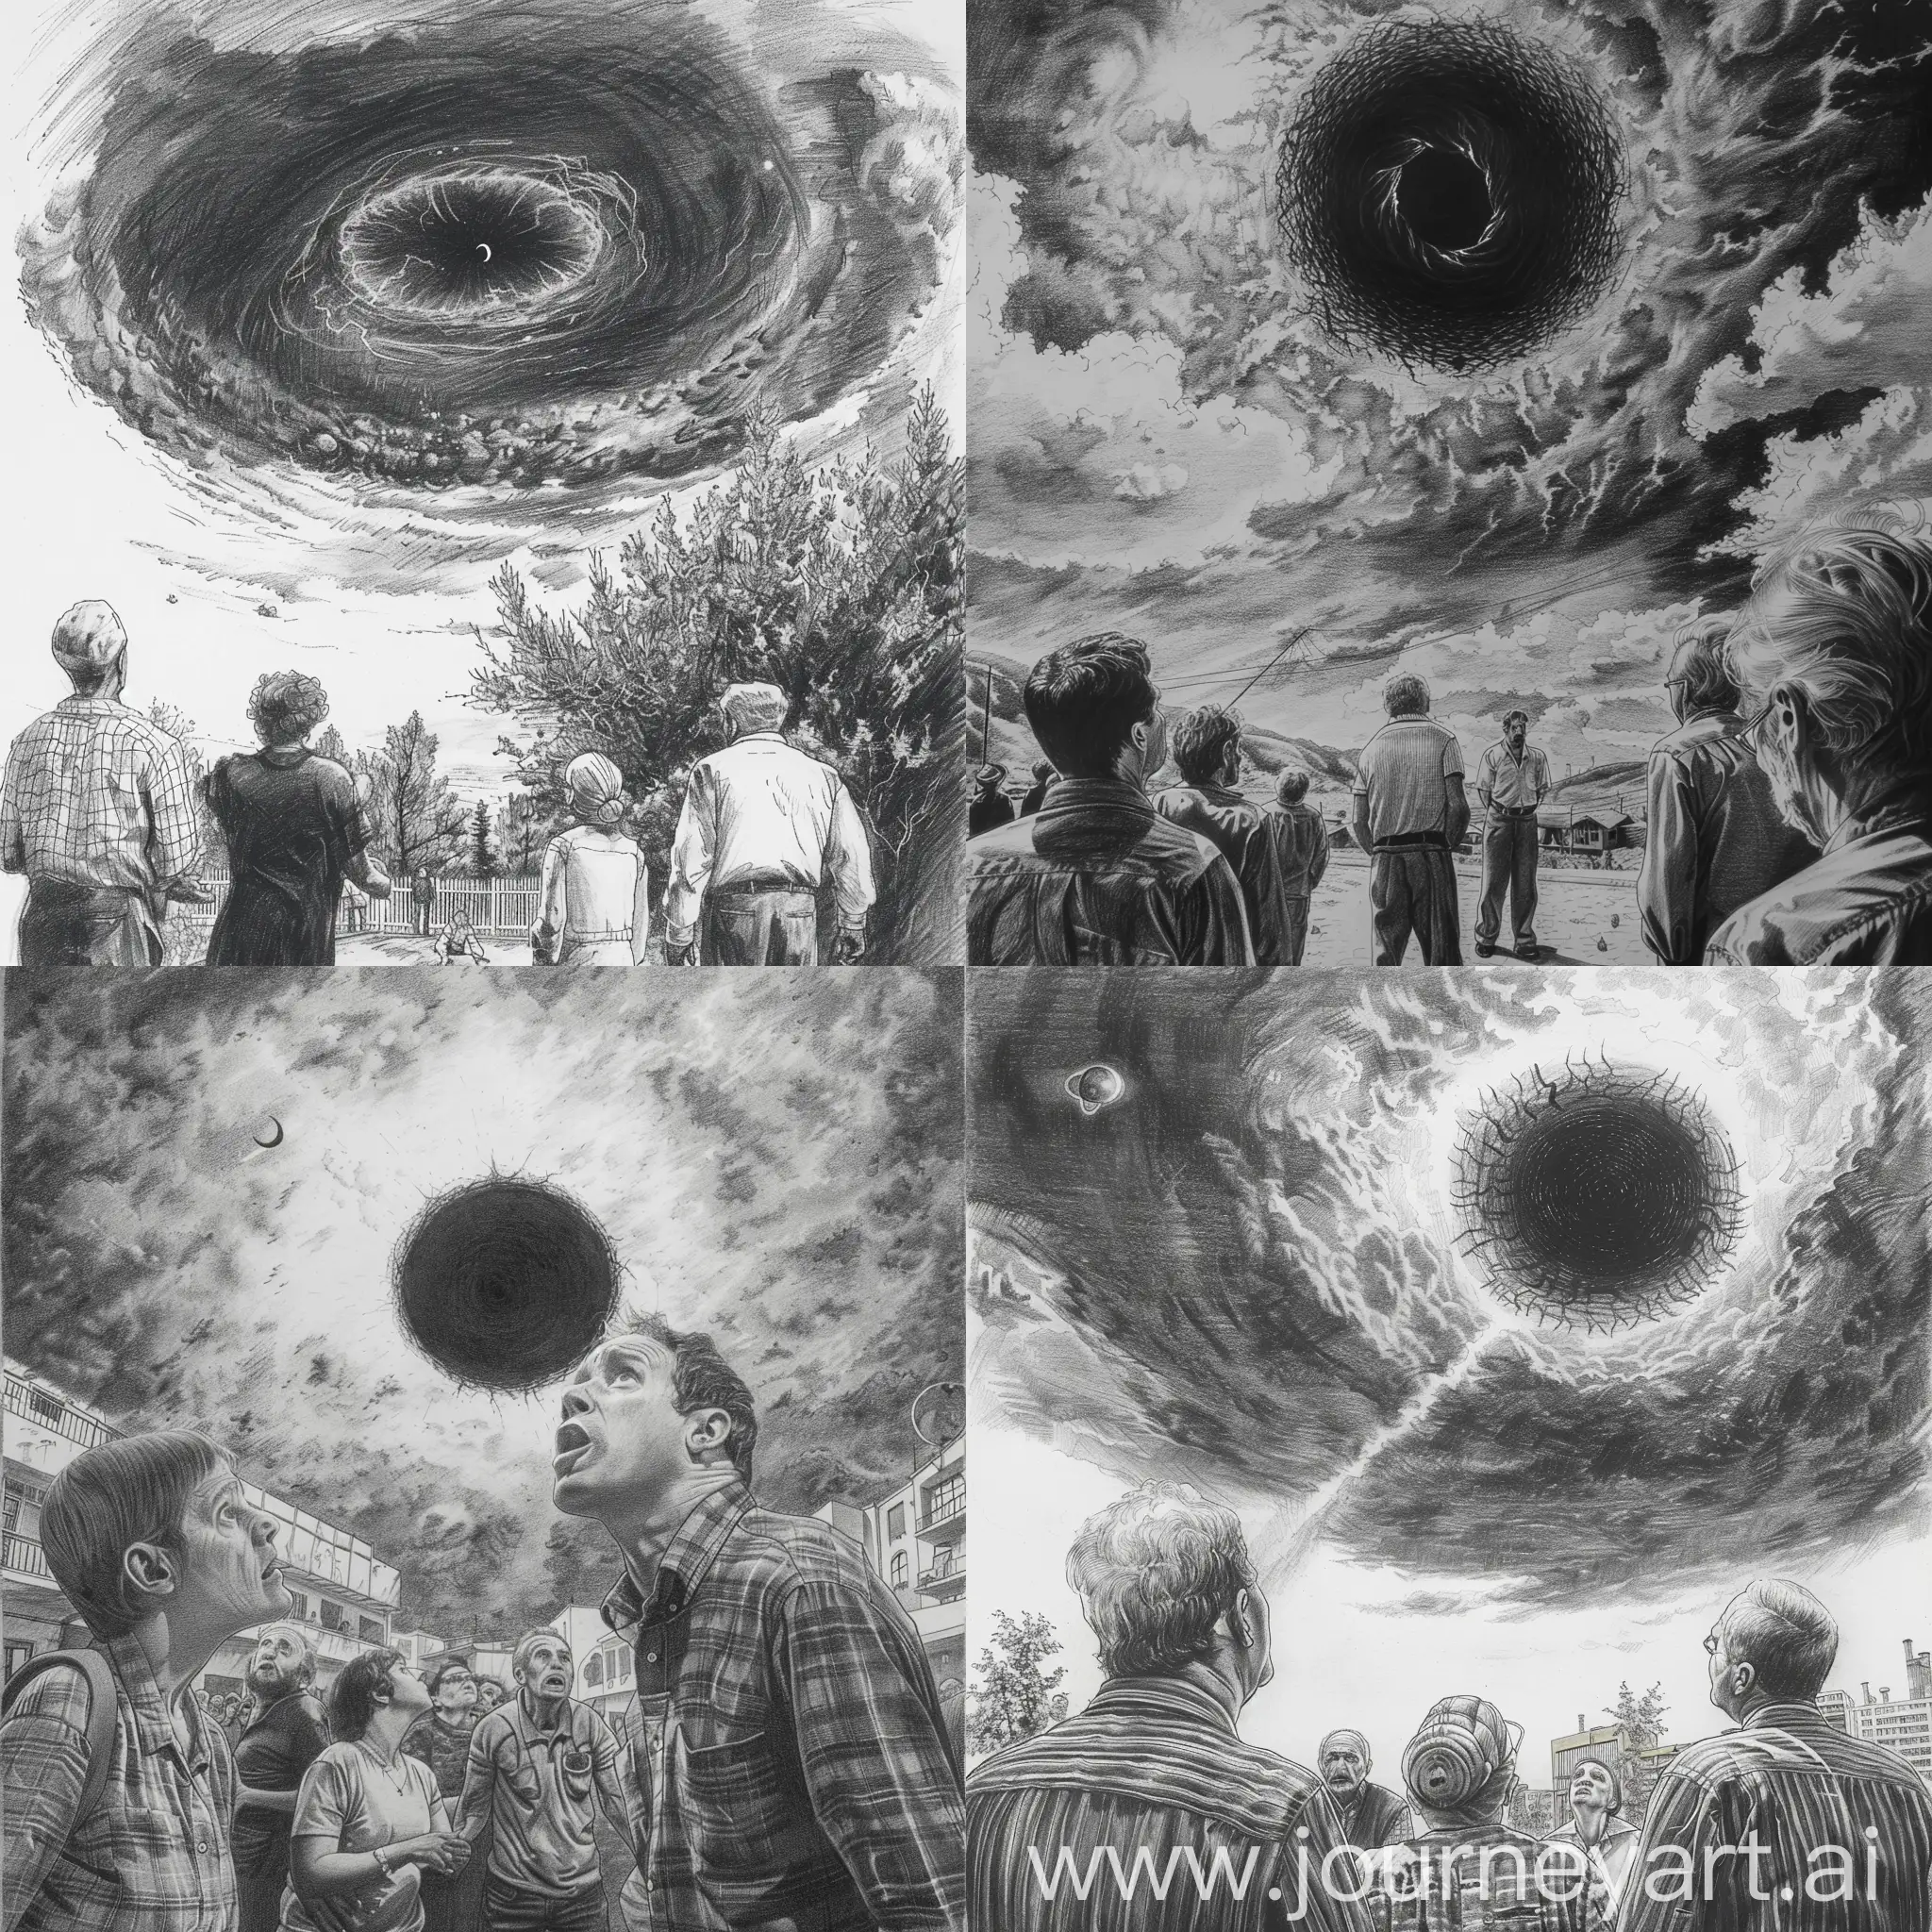 Monochrome-Pencil-Drawing-People-Gazing-in-Fear-as-a-Giant-Black-Hole-Emerges-in-the-Sky